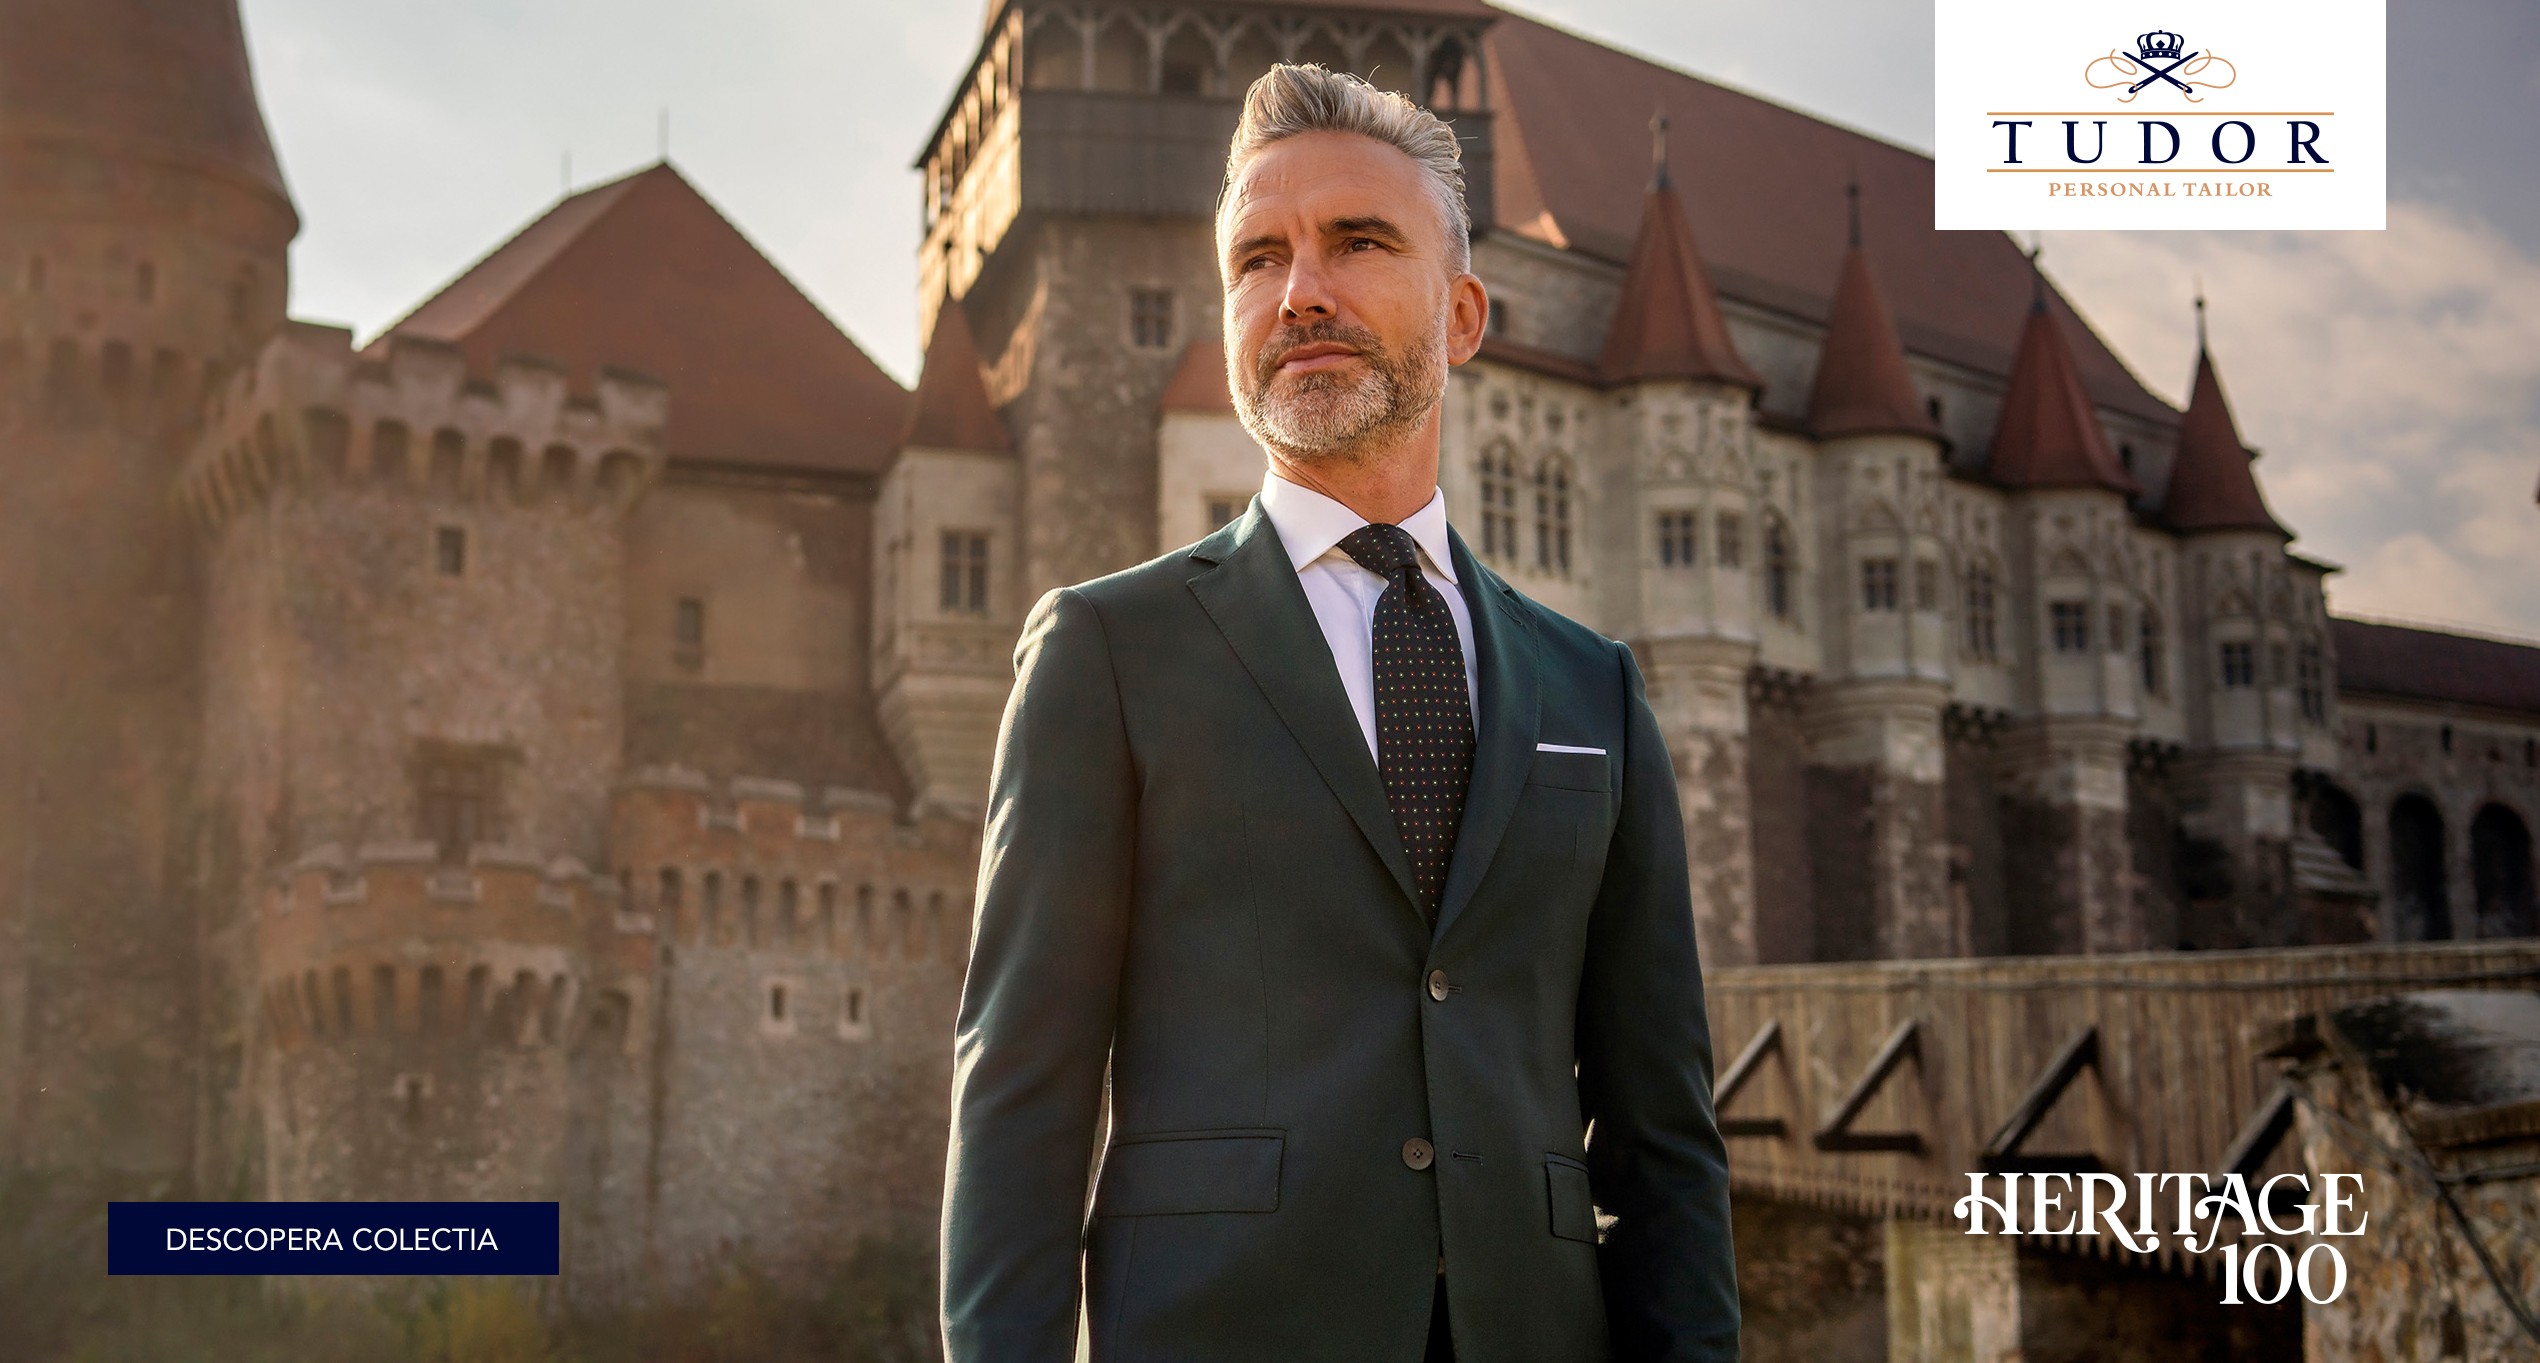 Tudor’s Tailor Made-to-measure